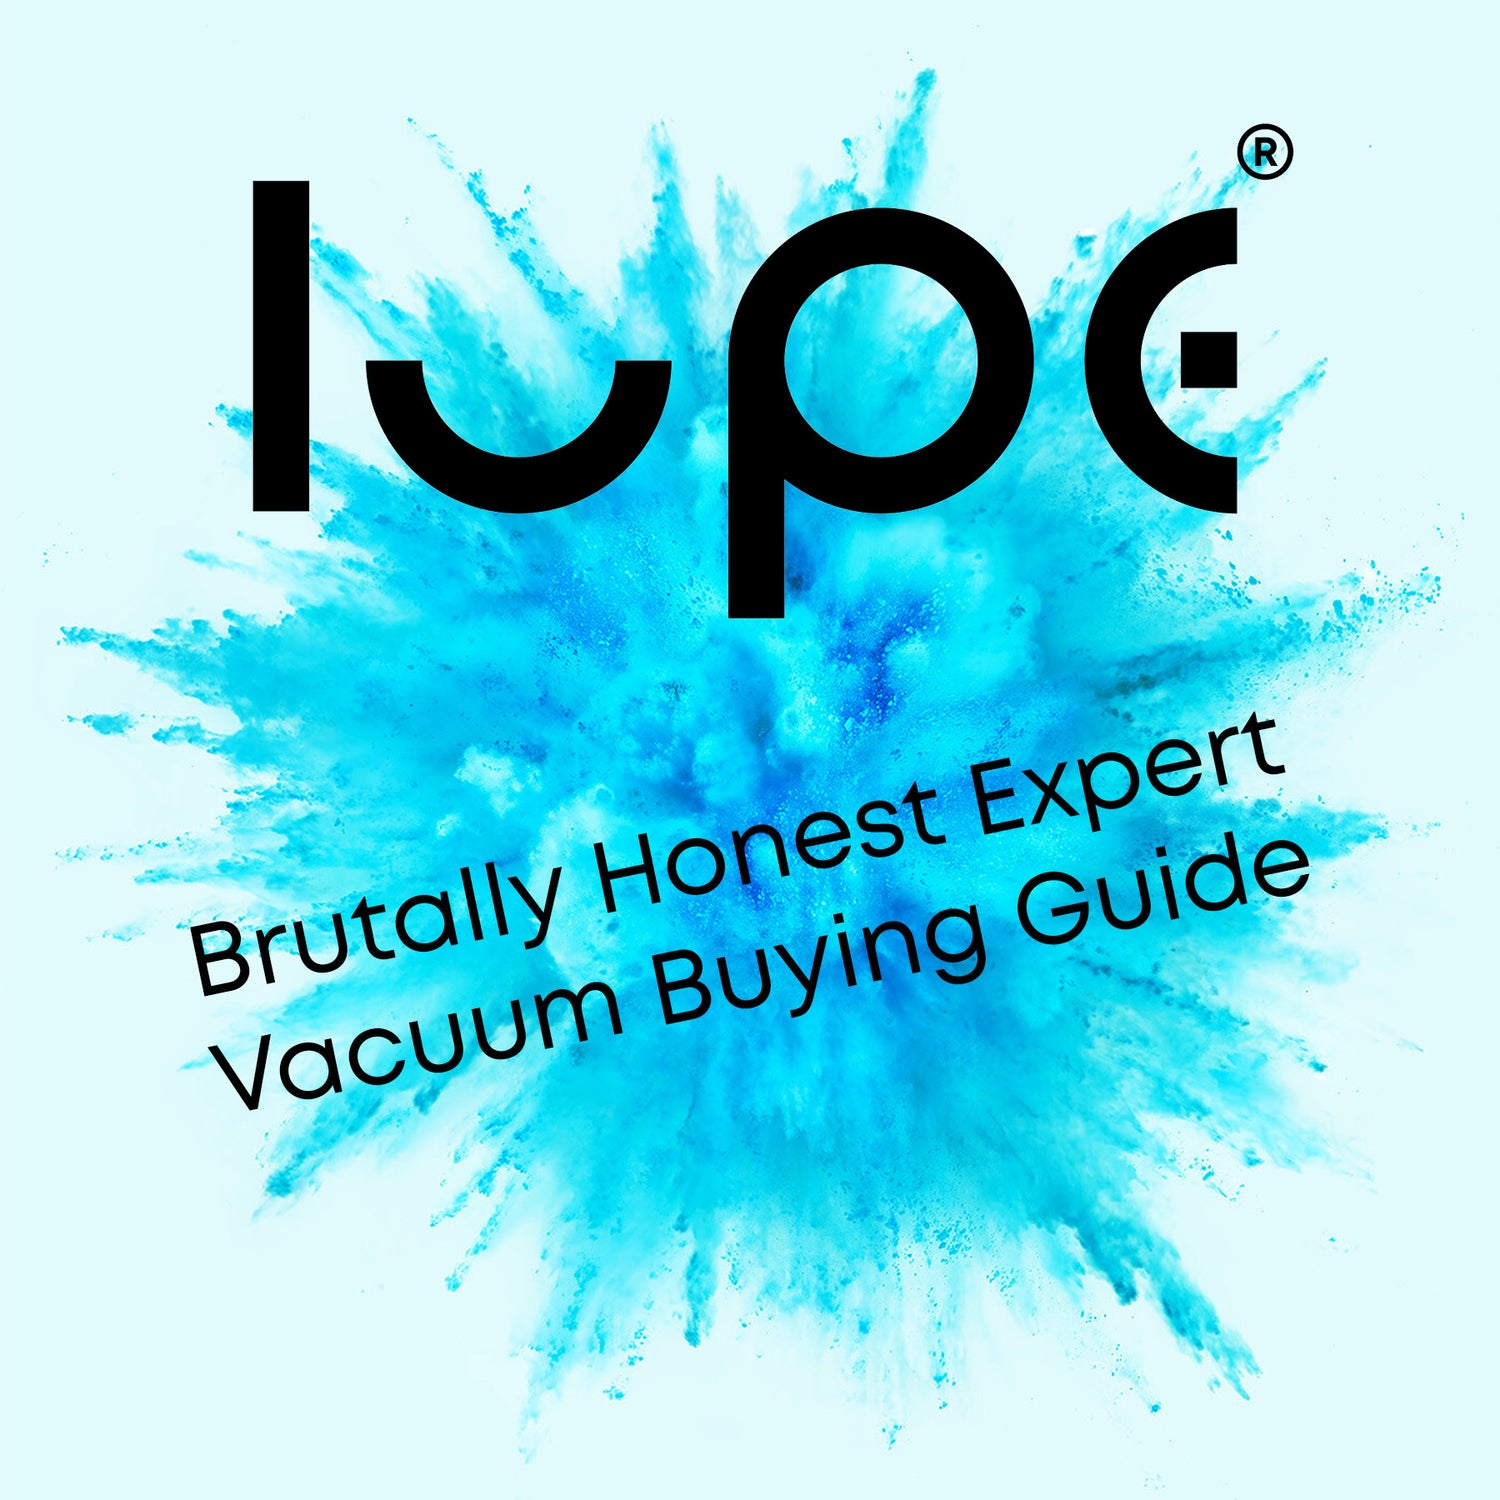 Expert Buying Guide Vacuum Cleaners